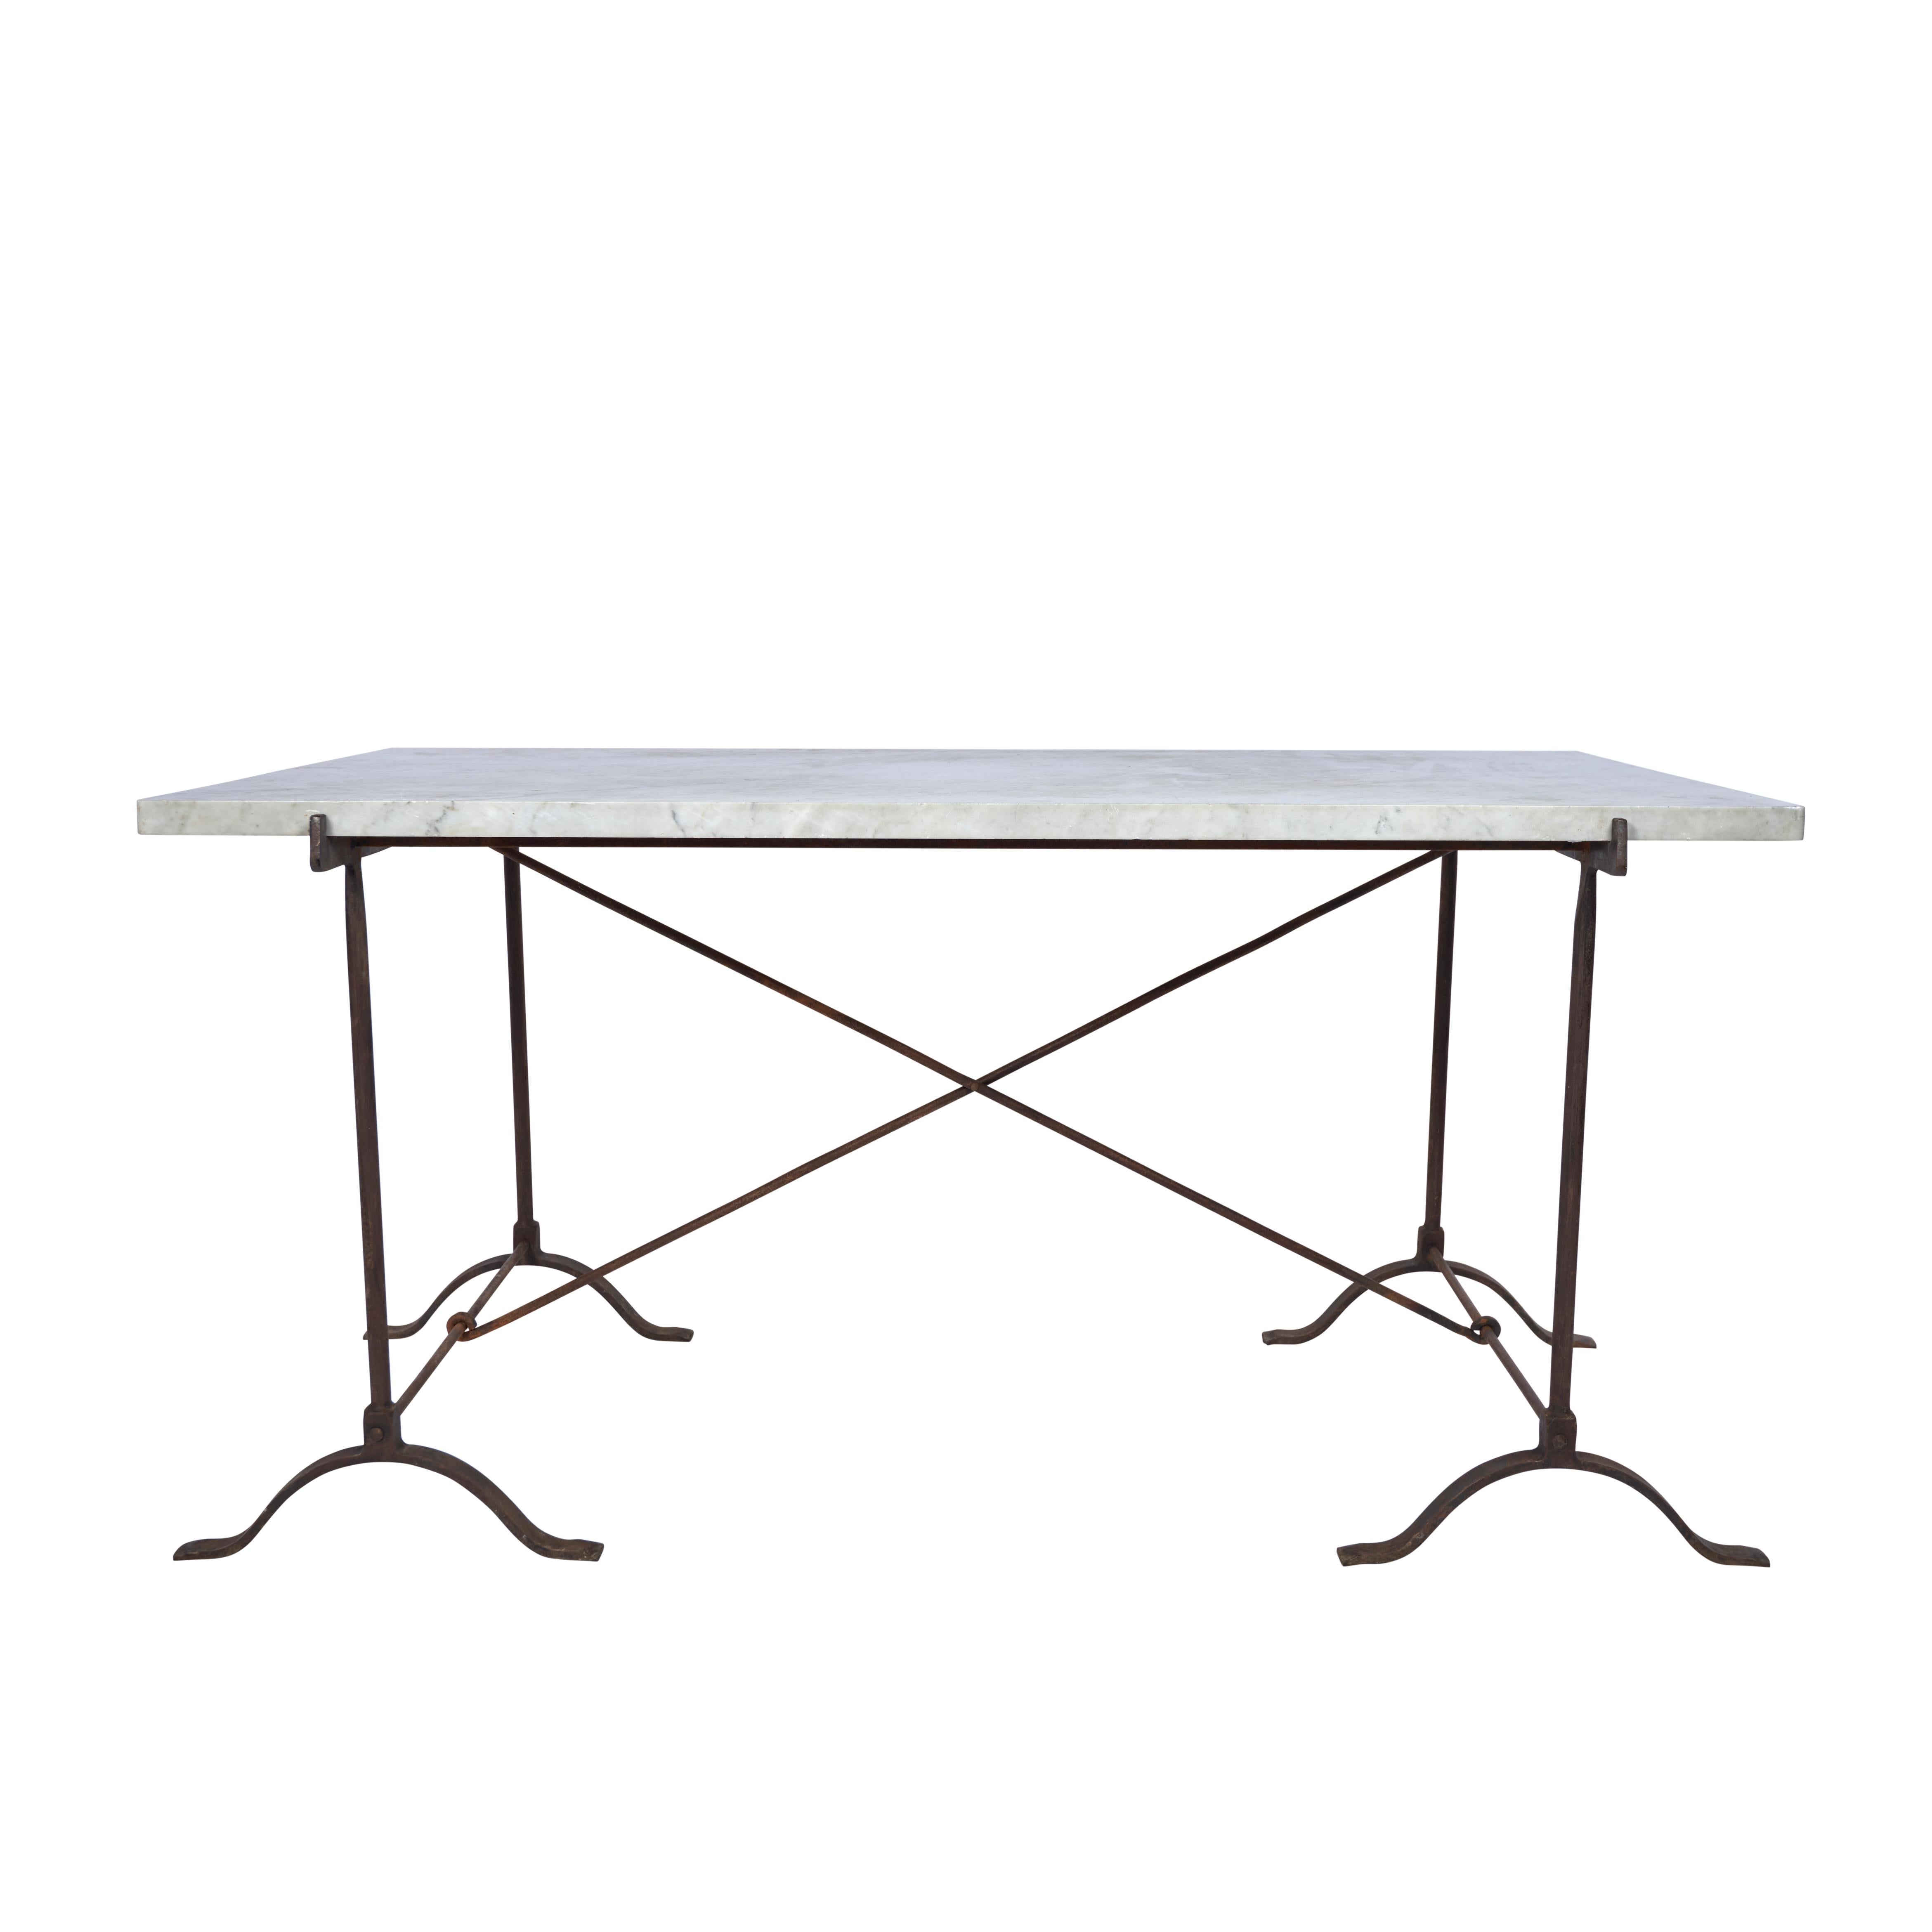 This French campaign table with marble top is from the 19th century.

Since Schumacher was founded in 1889, our family-owned company has been synonymous with style, taste, and innovation. A passion for luxury and an unwavering commitment to beauty